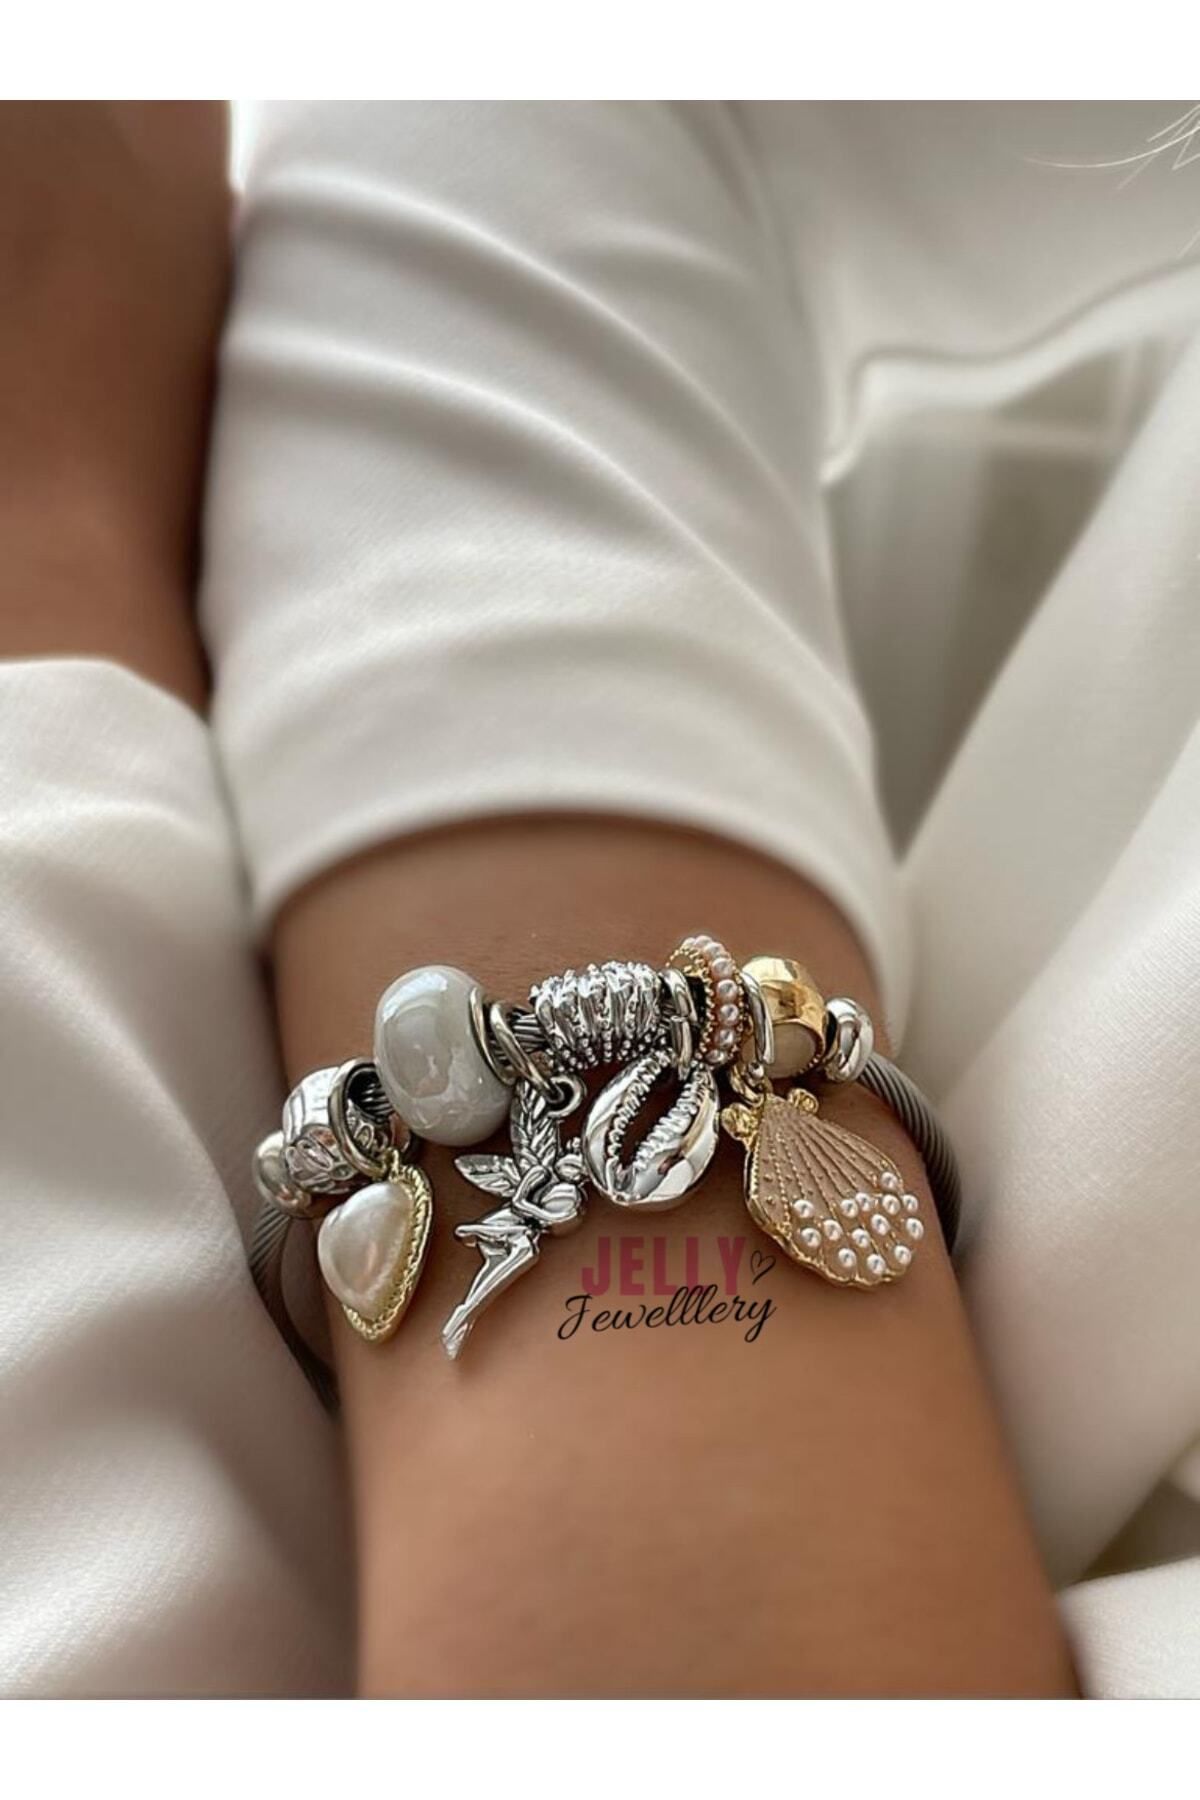 Pin by Ionica Corbet on Pandora bracelet ideas and rings stacking | Pandora  bracelet charms ideas, Pandora bracelet designs, Pandora jewelry charms